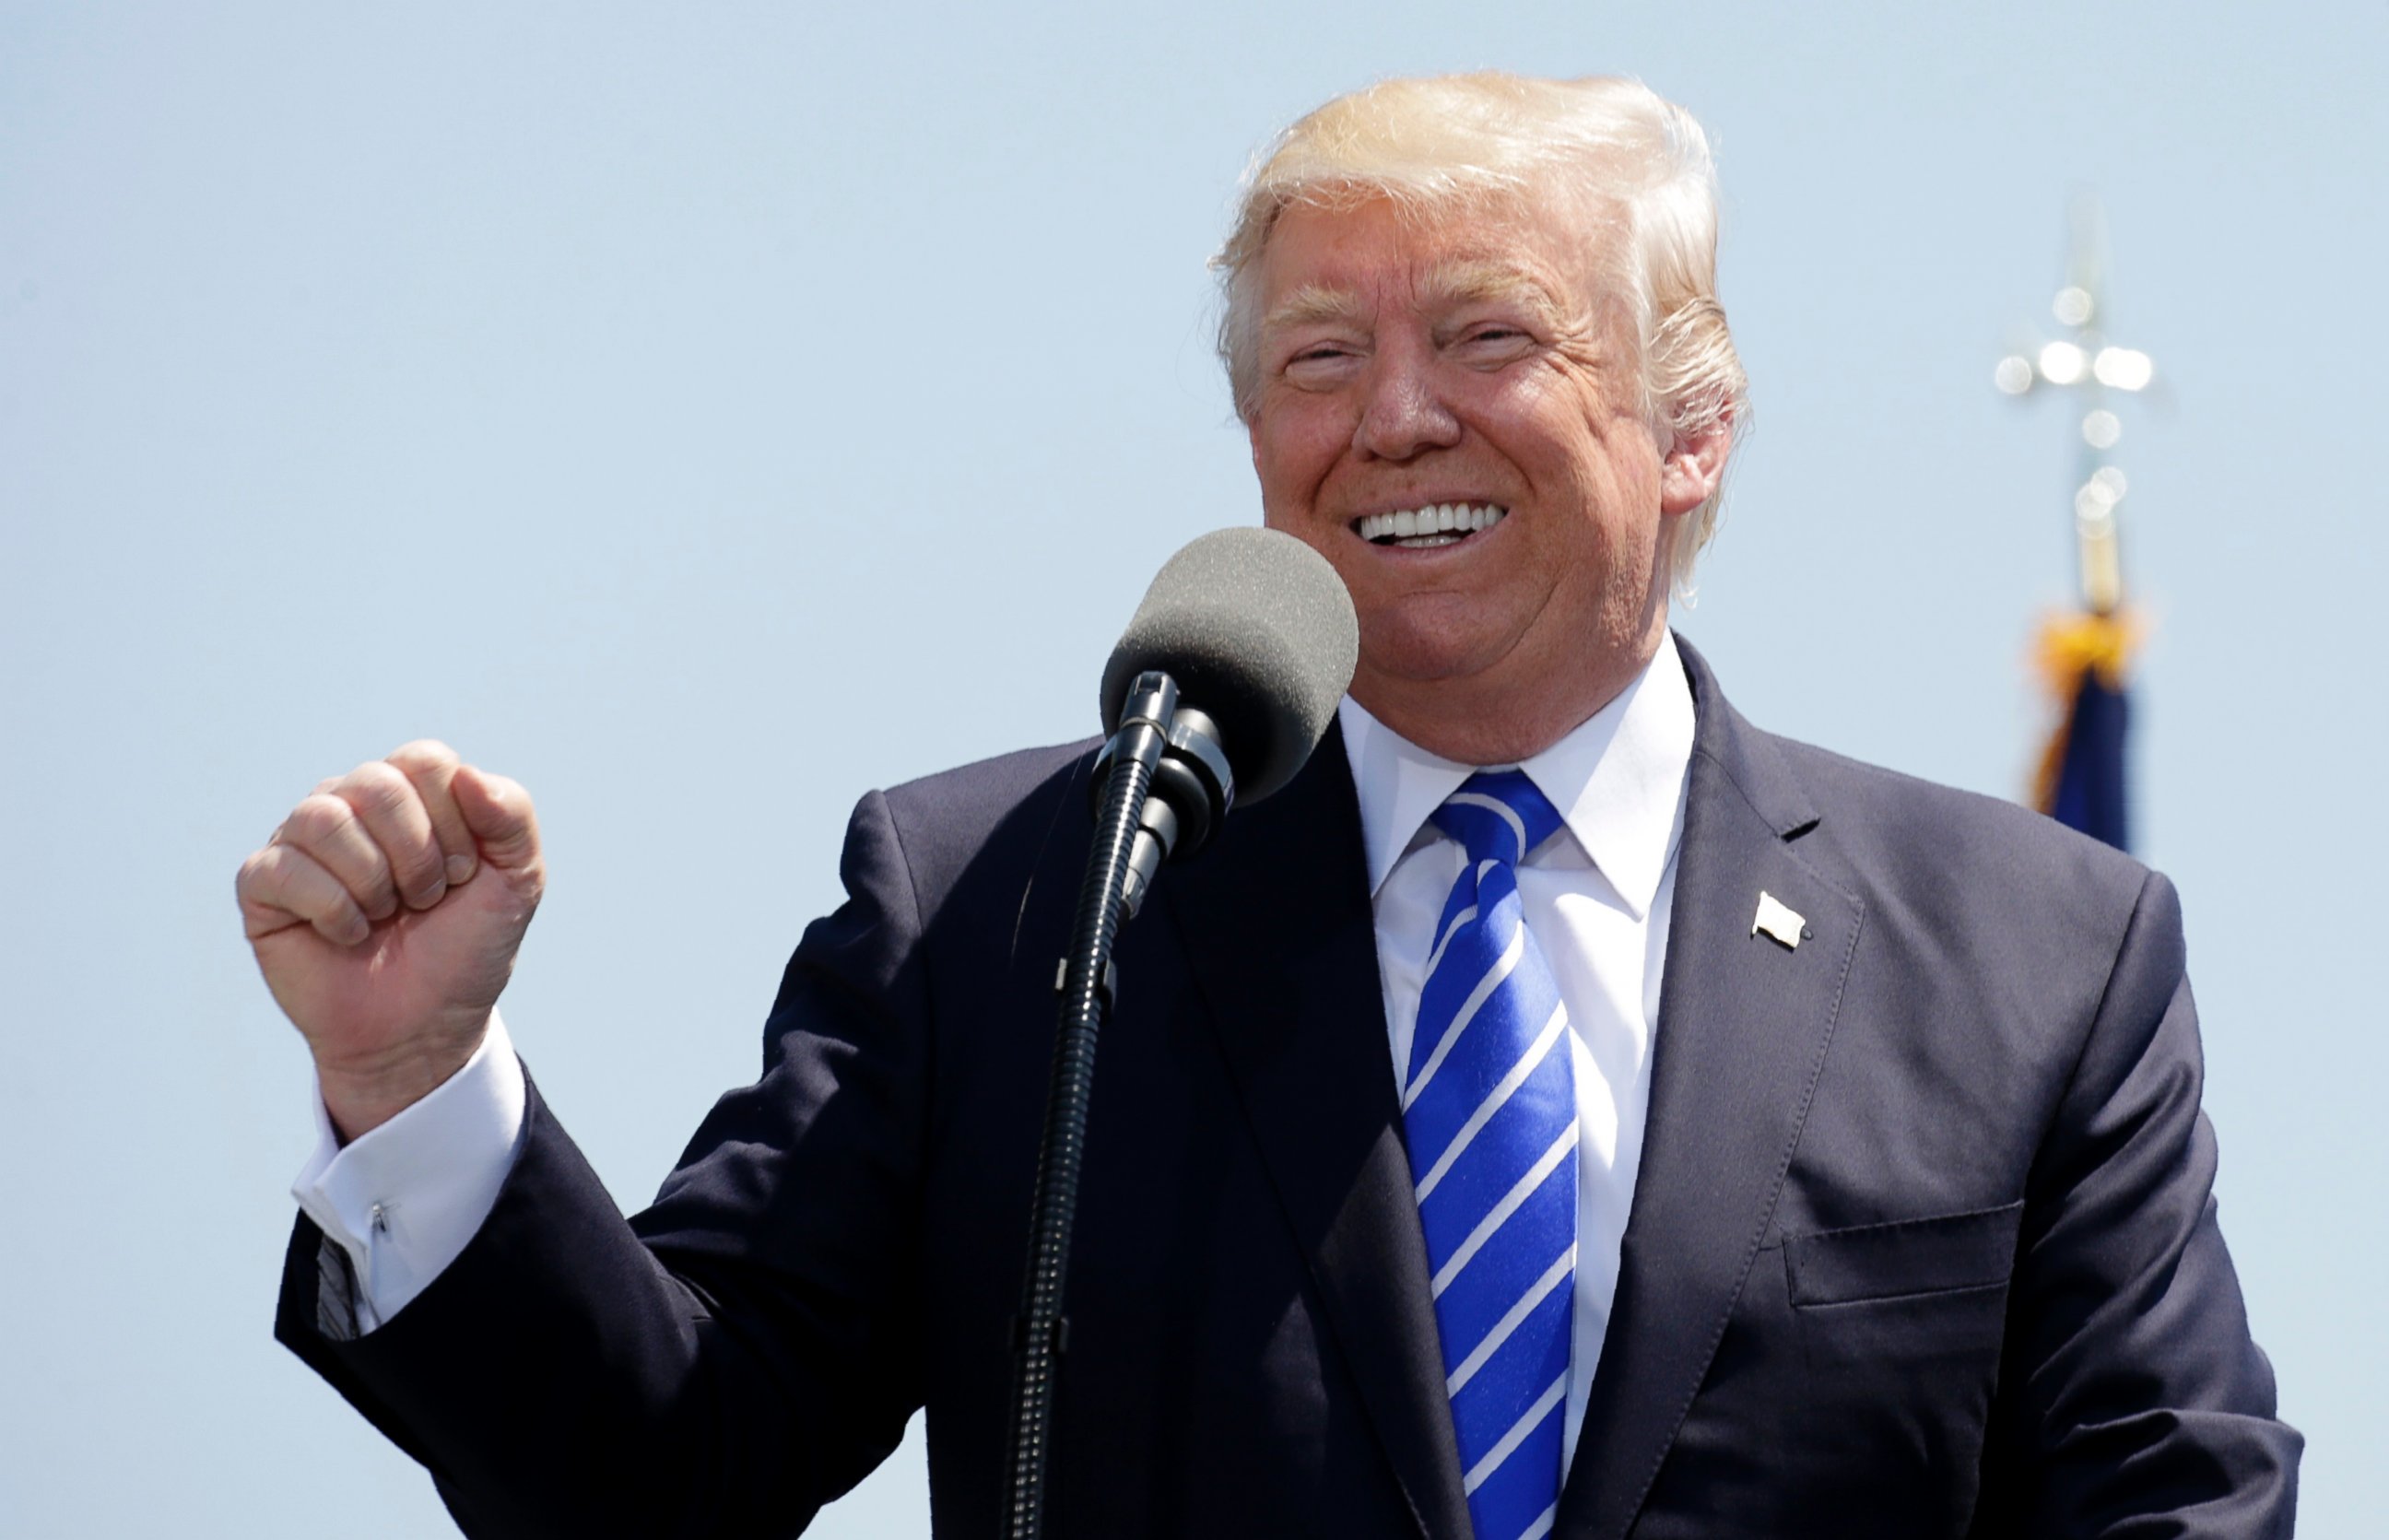 PHOTO: President Donald Trump pumps his fist and smiles as he addresses the graduating class of the U.S. Coast Guard Academy during commencement ceremonies in New London, Conn., on May 17, 2017. 